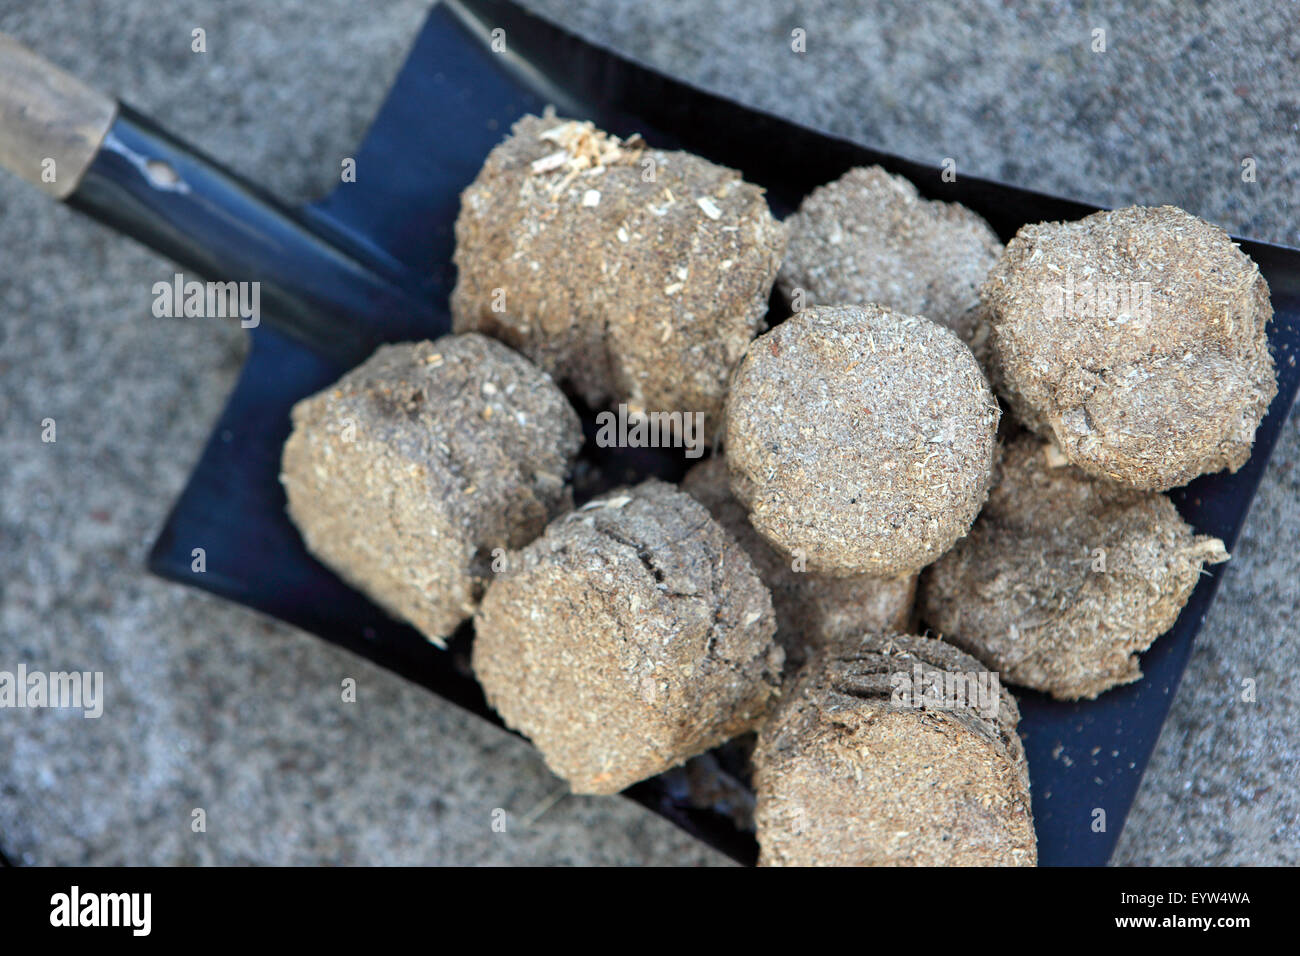 Shovel with sawdust briquettes for a wood burning stove Stock Photo